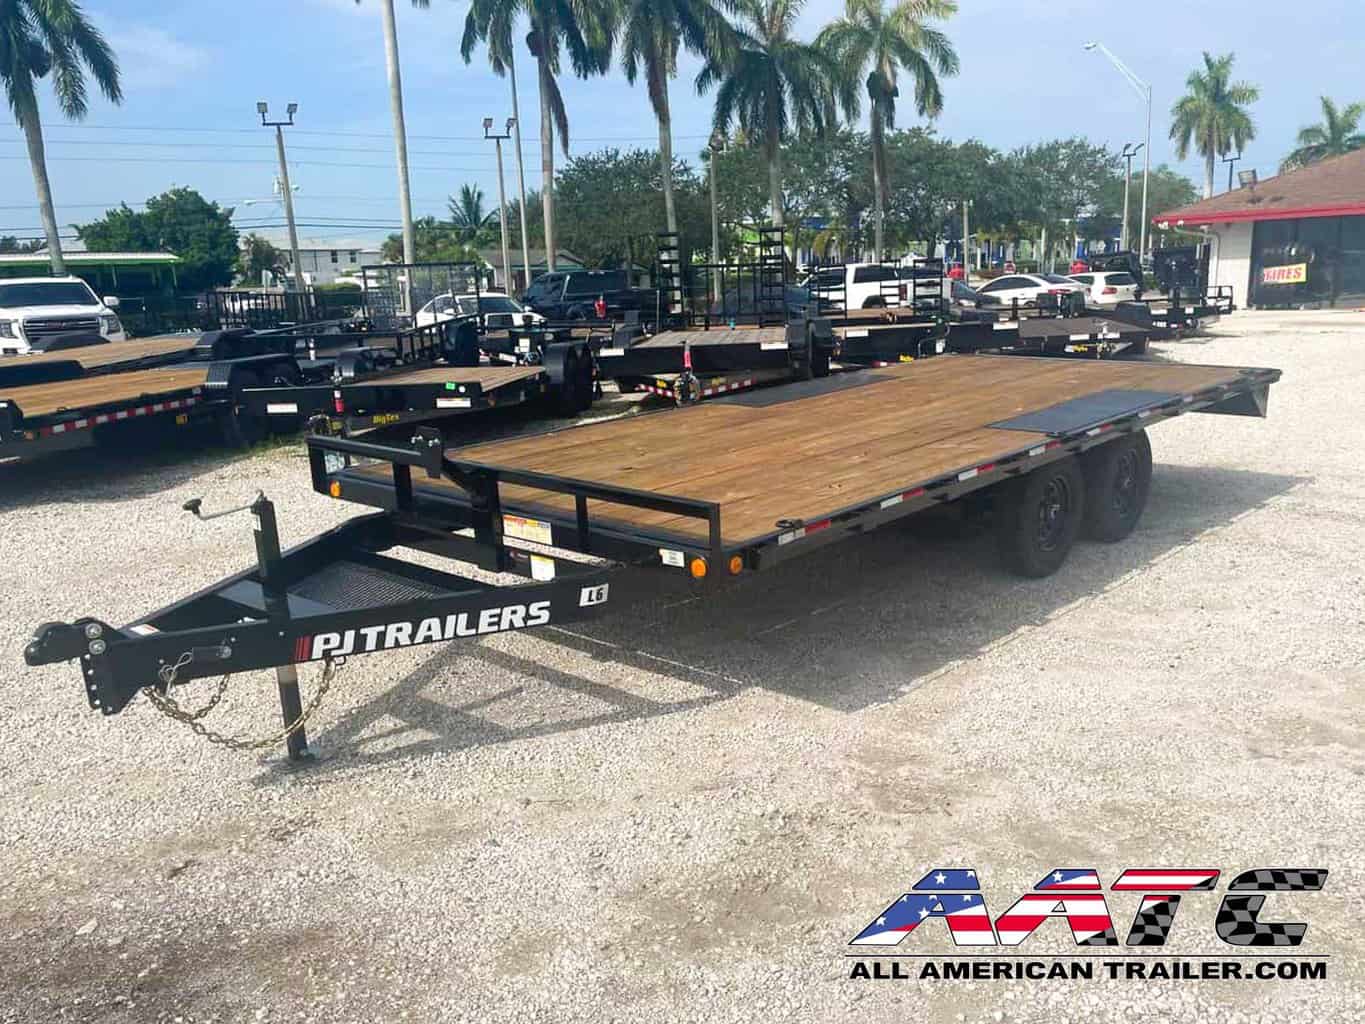 A black PJ 18-foot deckover equipment trailer with a 9,899 GVWR. This PJ Trailer features slide-in ramps, making it easy to load and unload equipment. It is a bumper pull hitch type trailer with electric brakes for enhanced safety. The PJ Deckover Trailer is designed for heavy-duty hauling and is part of the renowned PJ Trailers lineup.